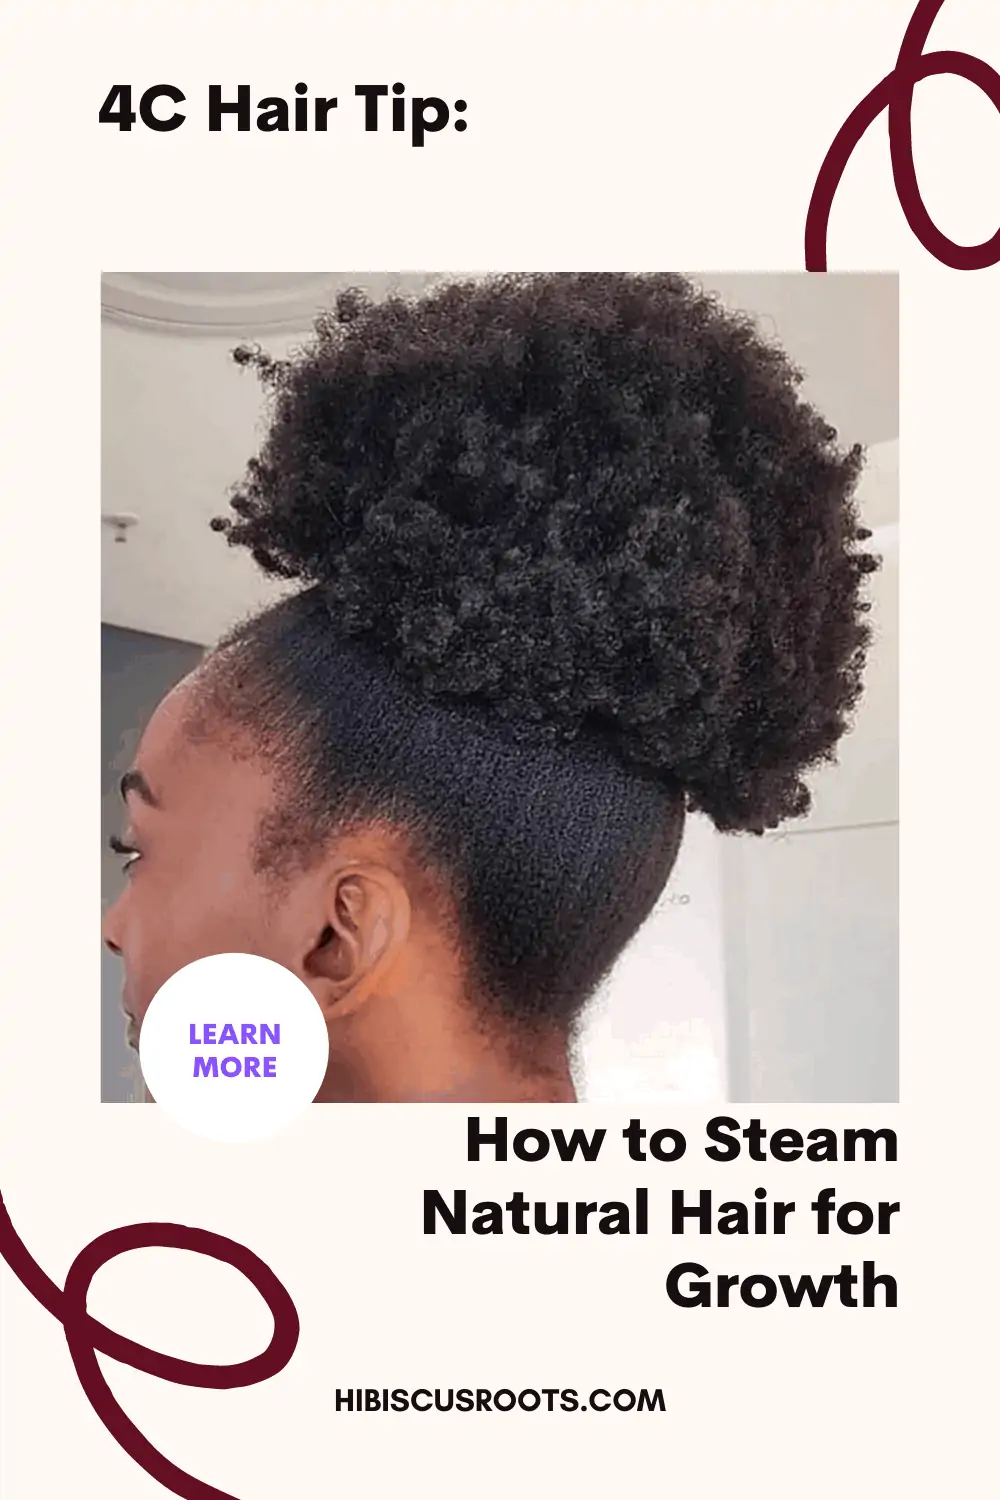 6 Hassle-Free Ways to Steam Natural Hair at Home!